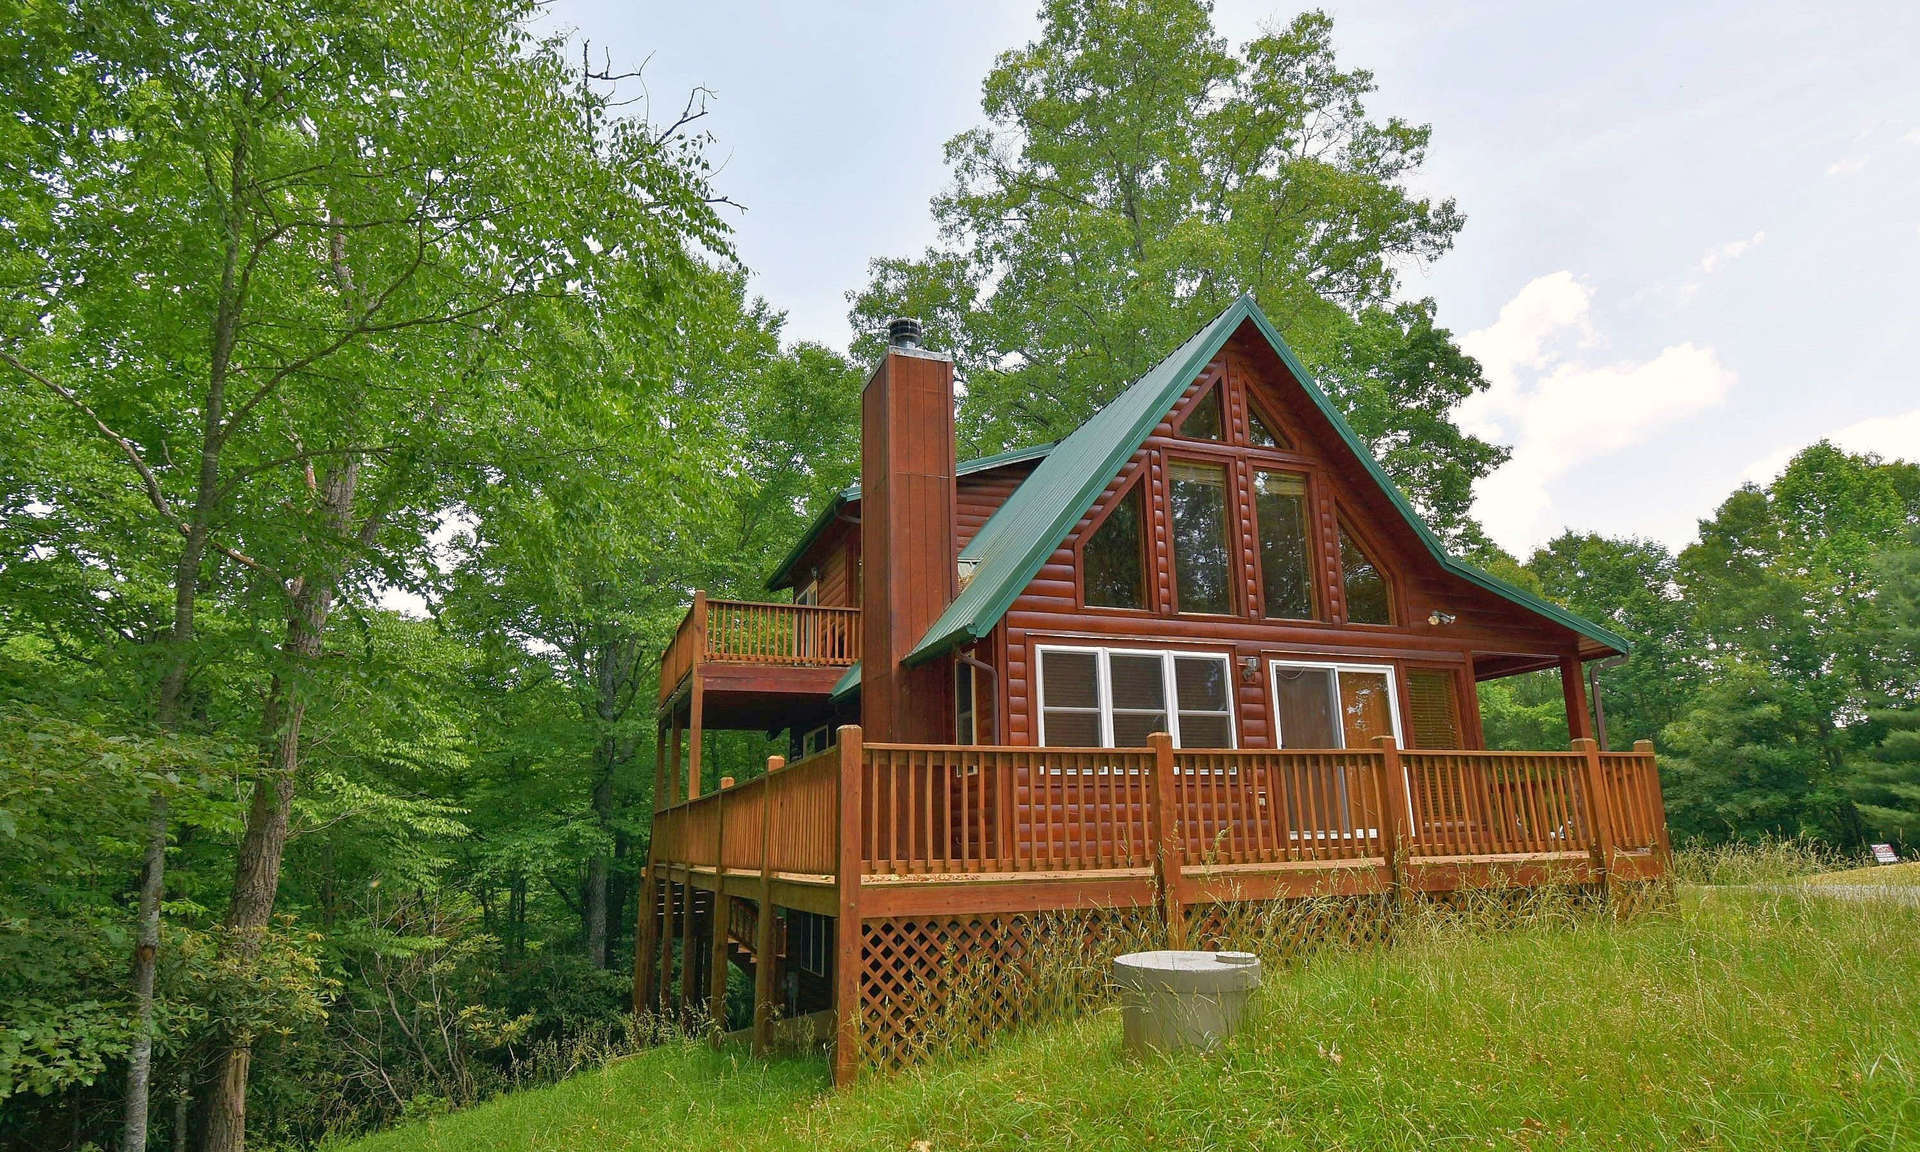 Enjoy peaceful and relaxing surroundings in this lovely 2-bedroom, 2.5-bath cabin located in Deerwood Park, a well known community in the Piney Creek area of Alleghany County in the mountains of North Carolina.